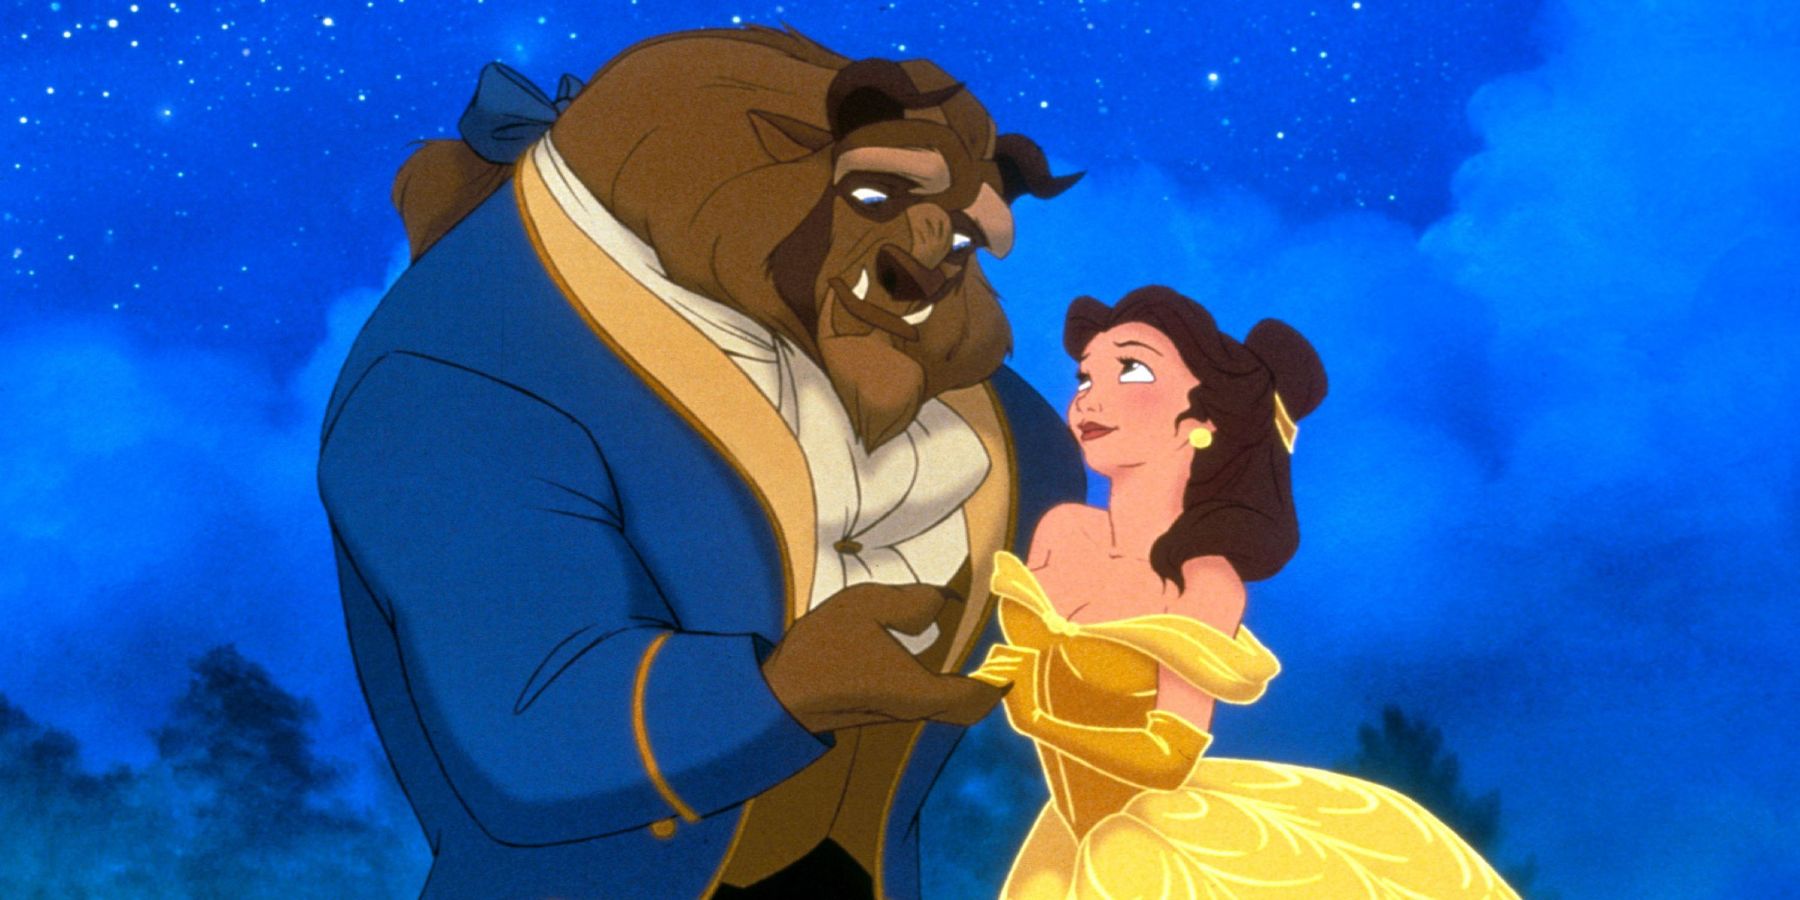 Beauty and the Beast 1991 animated